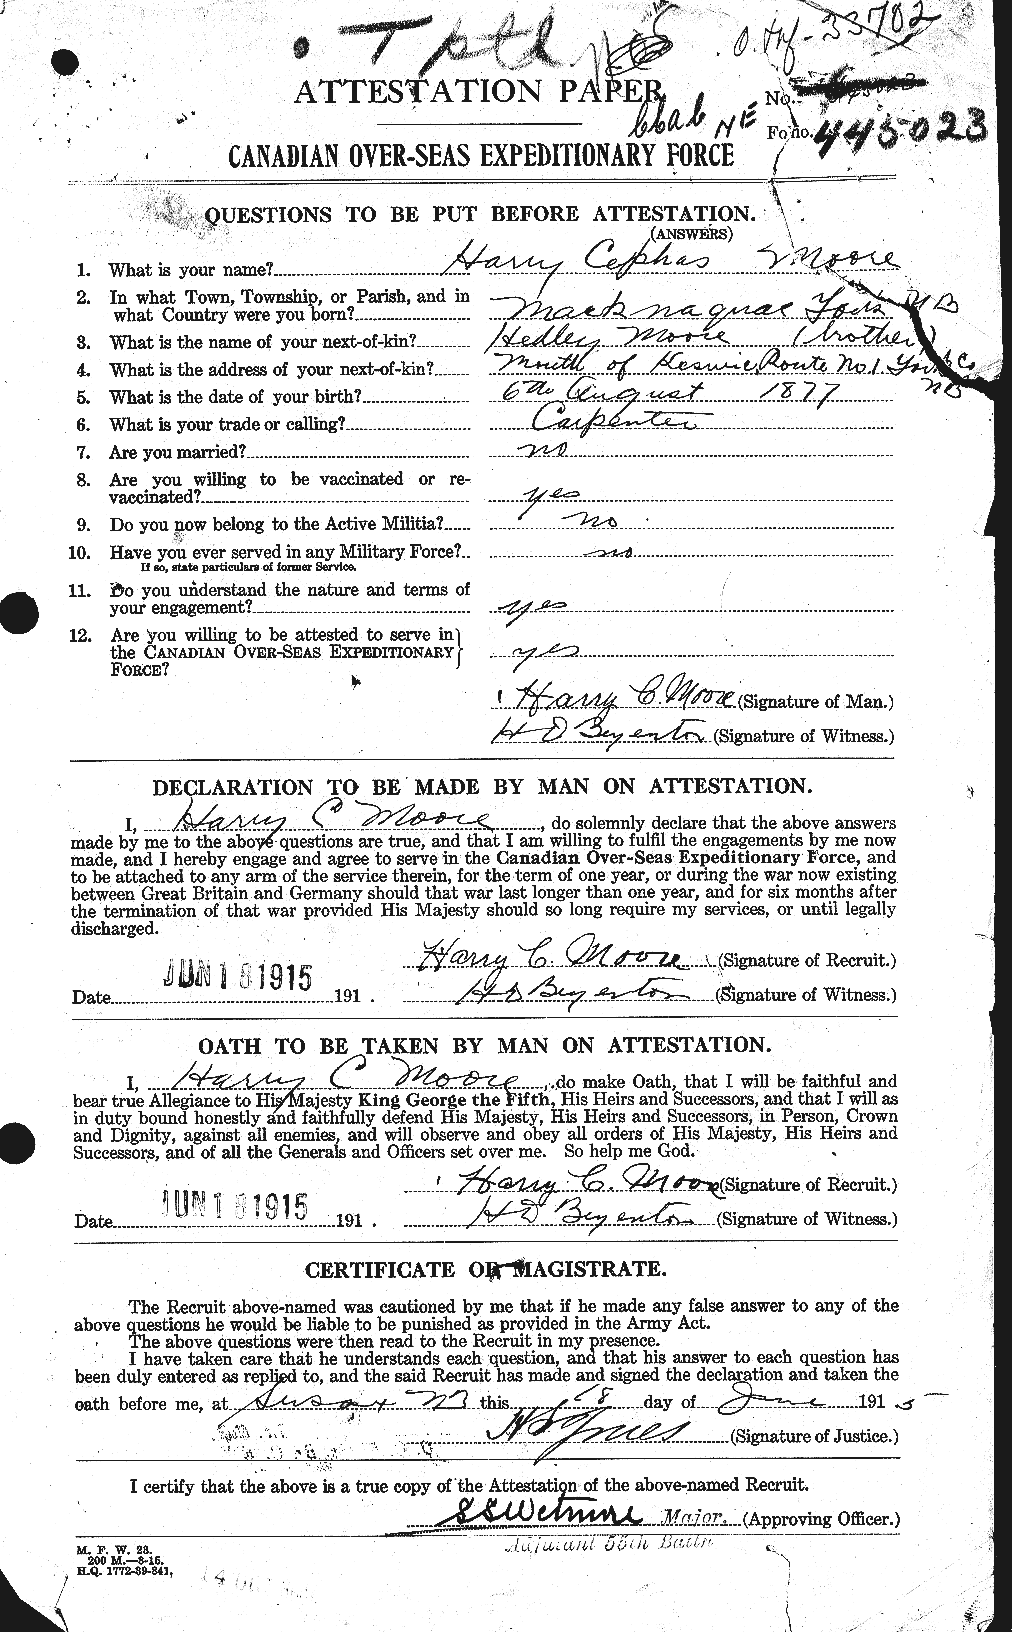 Personnel Records of the First World War - CEF 502080a